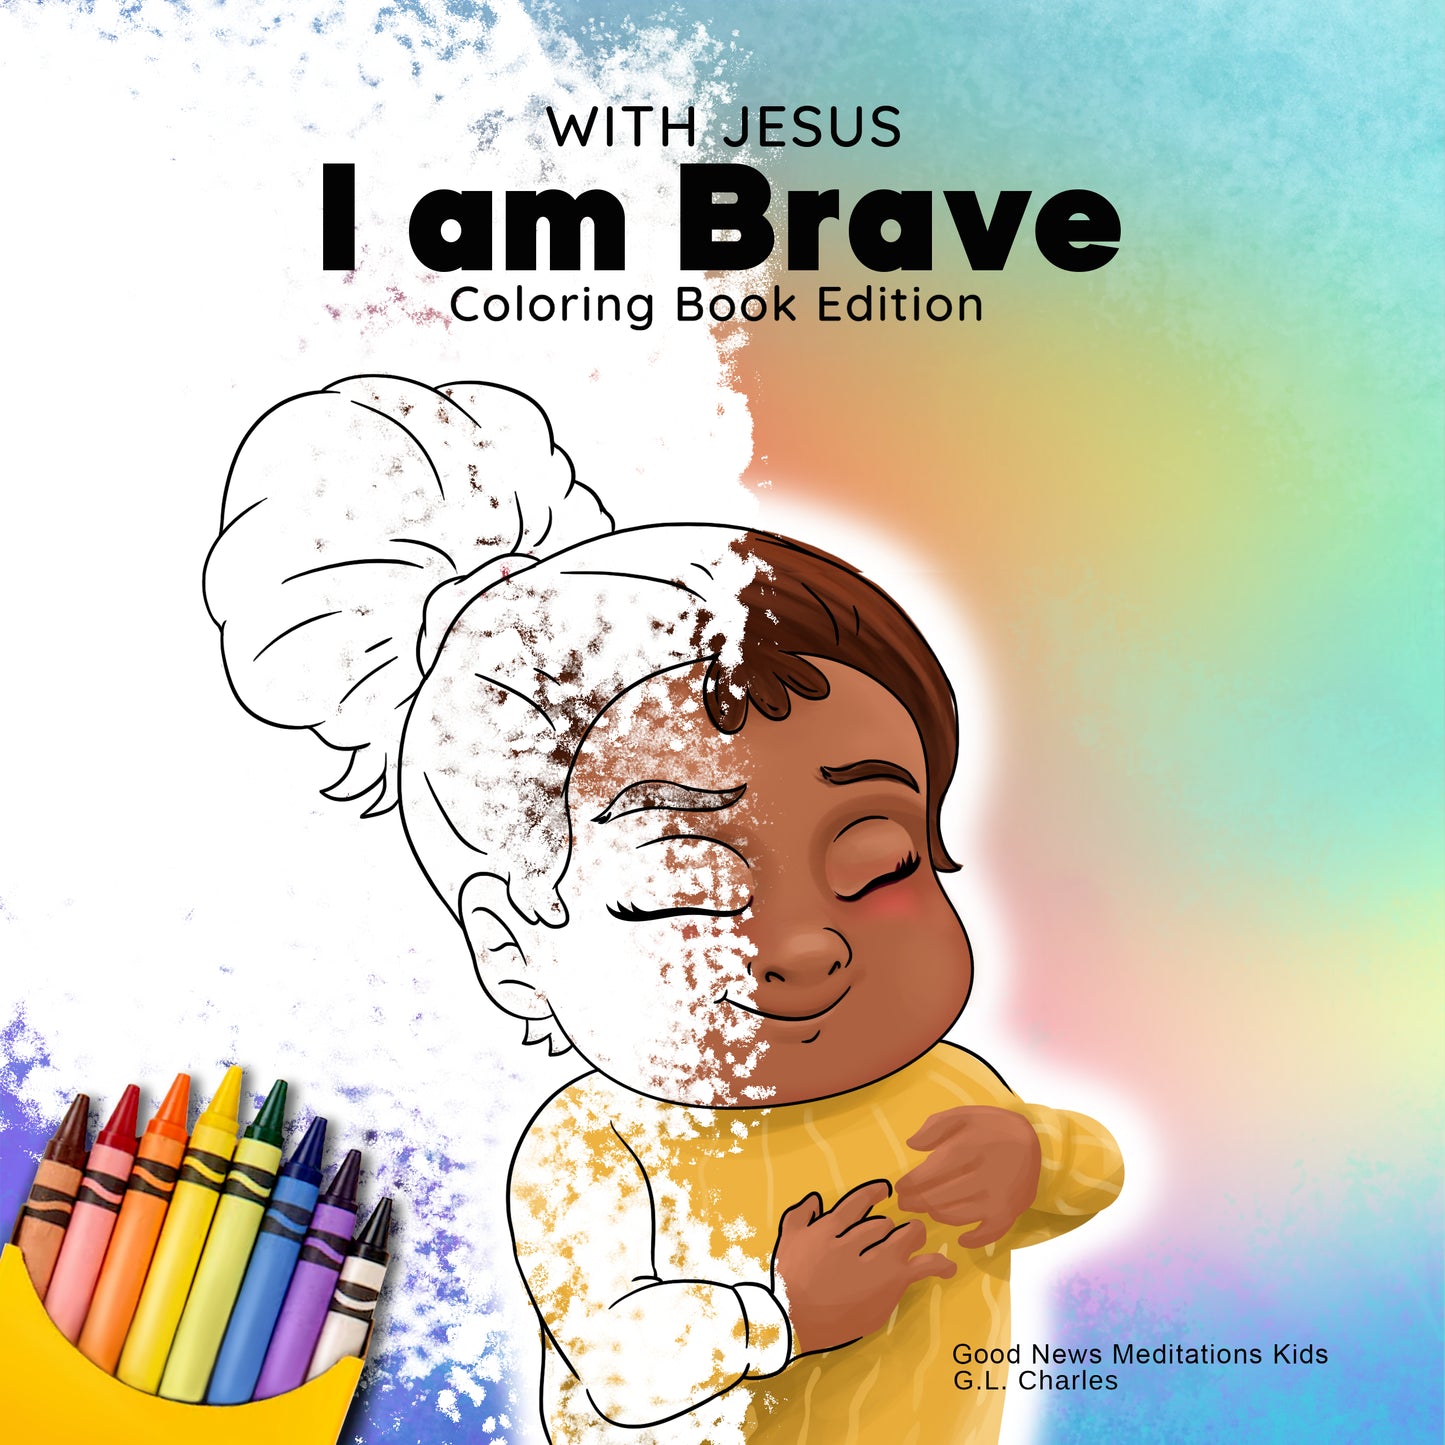 With Jesus I am Brave Coloring Book - Print Ready - Digital Product - Instant Download